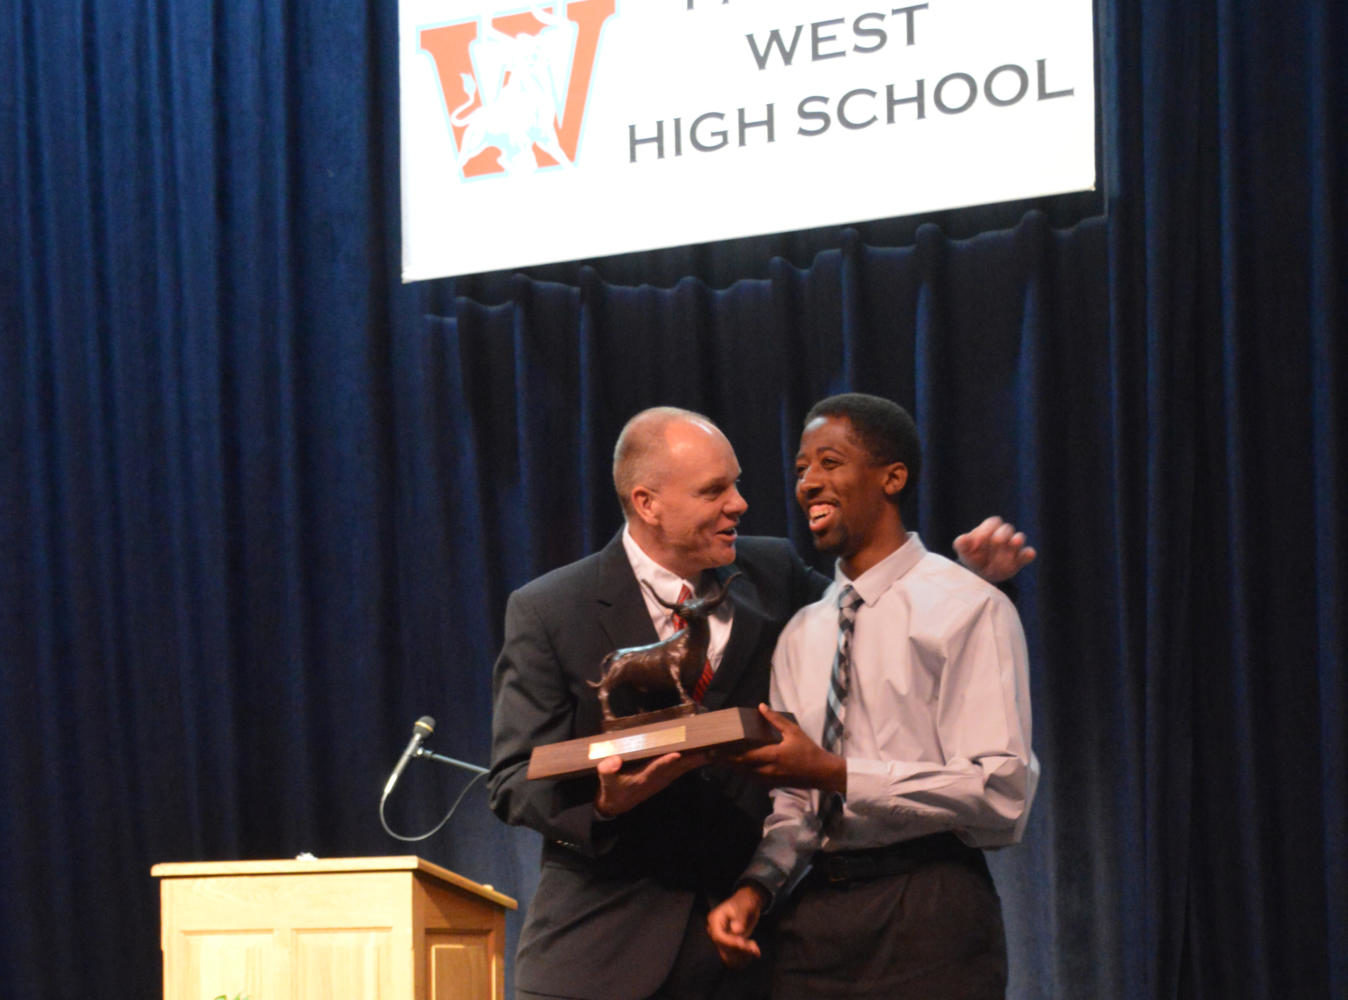 Principal Jeremy Mitchell awards senior Nehemiah Colyer the 2017 Founders Award recipient. The Founder’s Award is given to a student who exemplifies what West students stand for: good character, academics, school spirit and is the highest school honor.